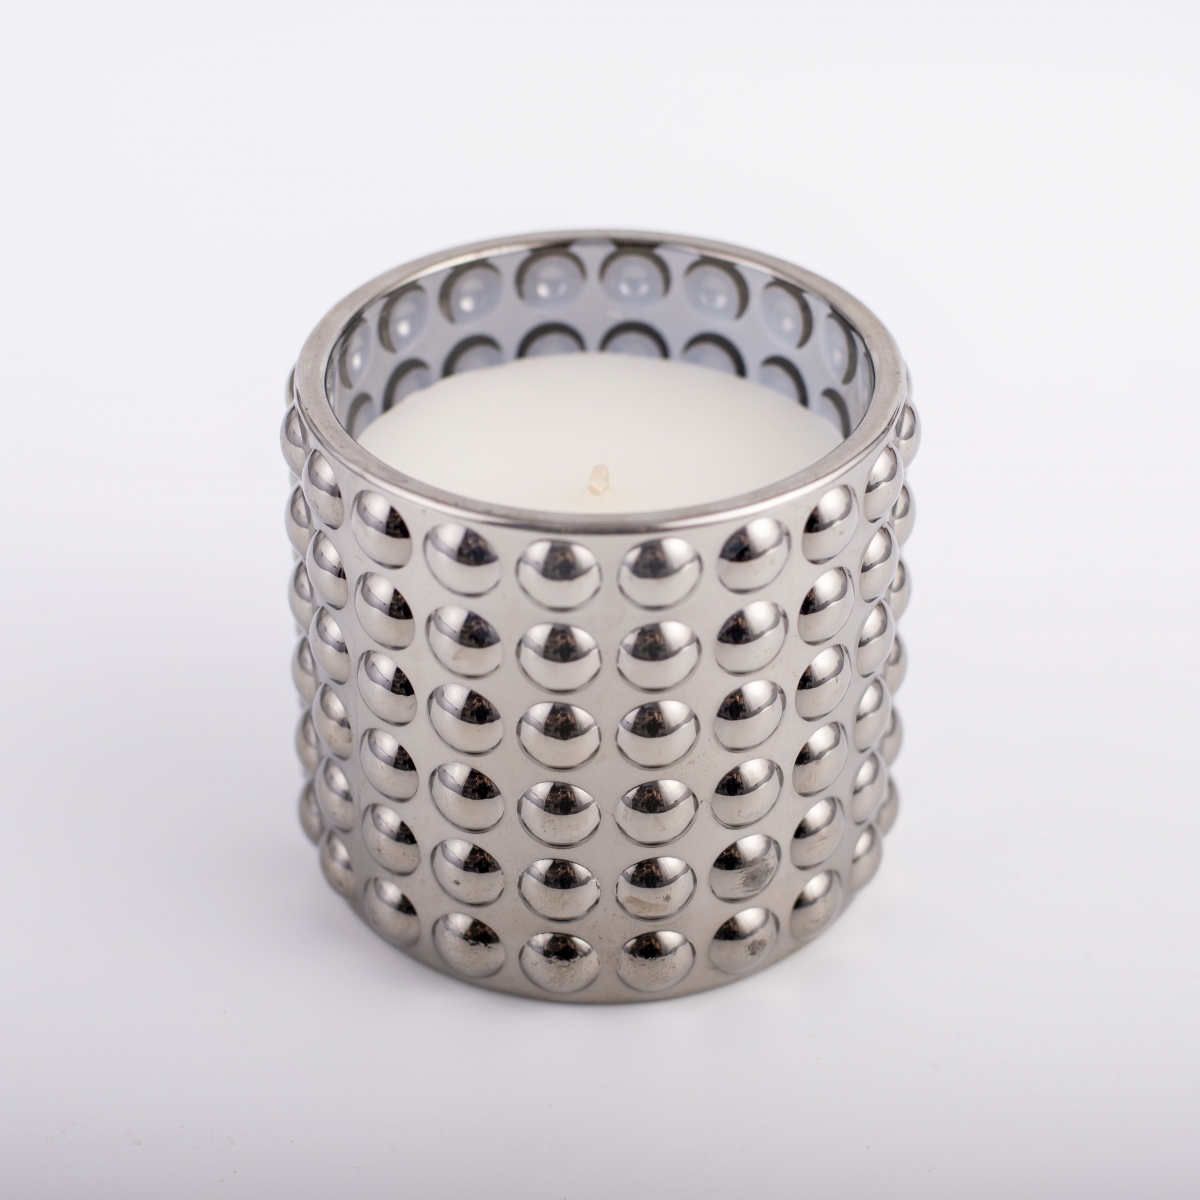 Soy Candles – Luxury Smoke Gray Color ,Dot Relief Candle Jar ,Scented Candles ,China Factory ,Price-HOWCANDLE-Candles,Scented Candles,Aromatherapy Candles,Soy Candles,Vegan Candles,Jar Candles,Pillar Candles,Candle Gift Sets,Essential Oils,Reed Diffuser,Candle Holder,